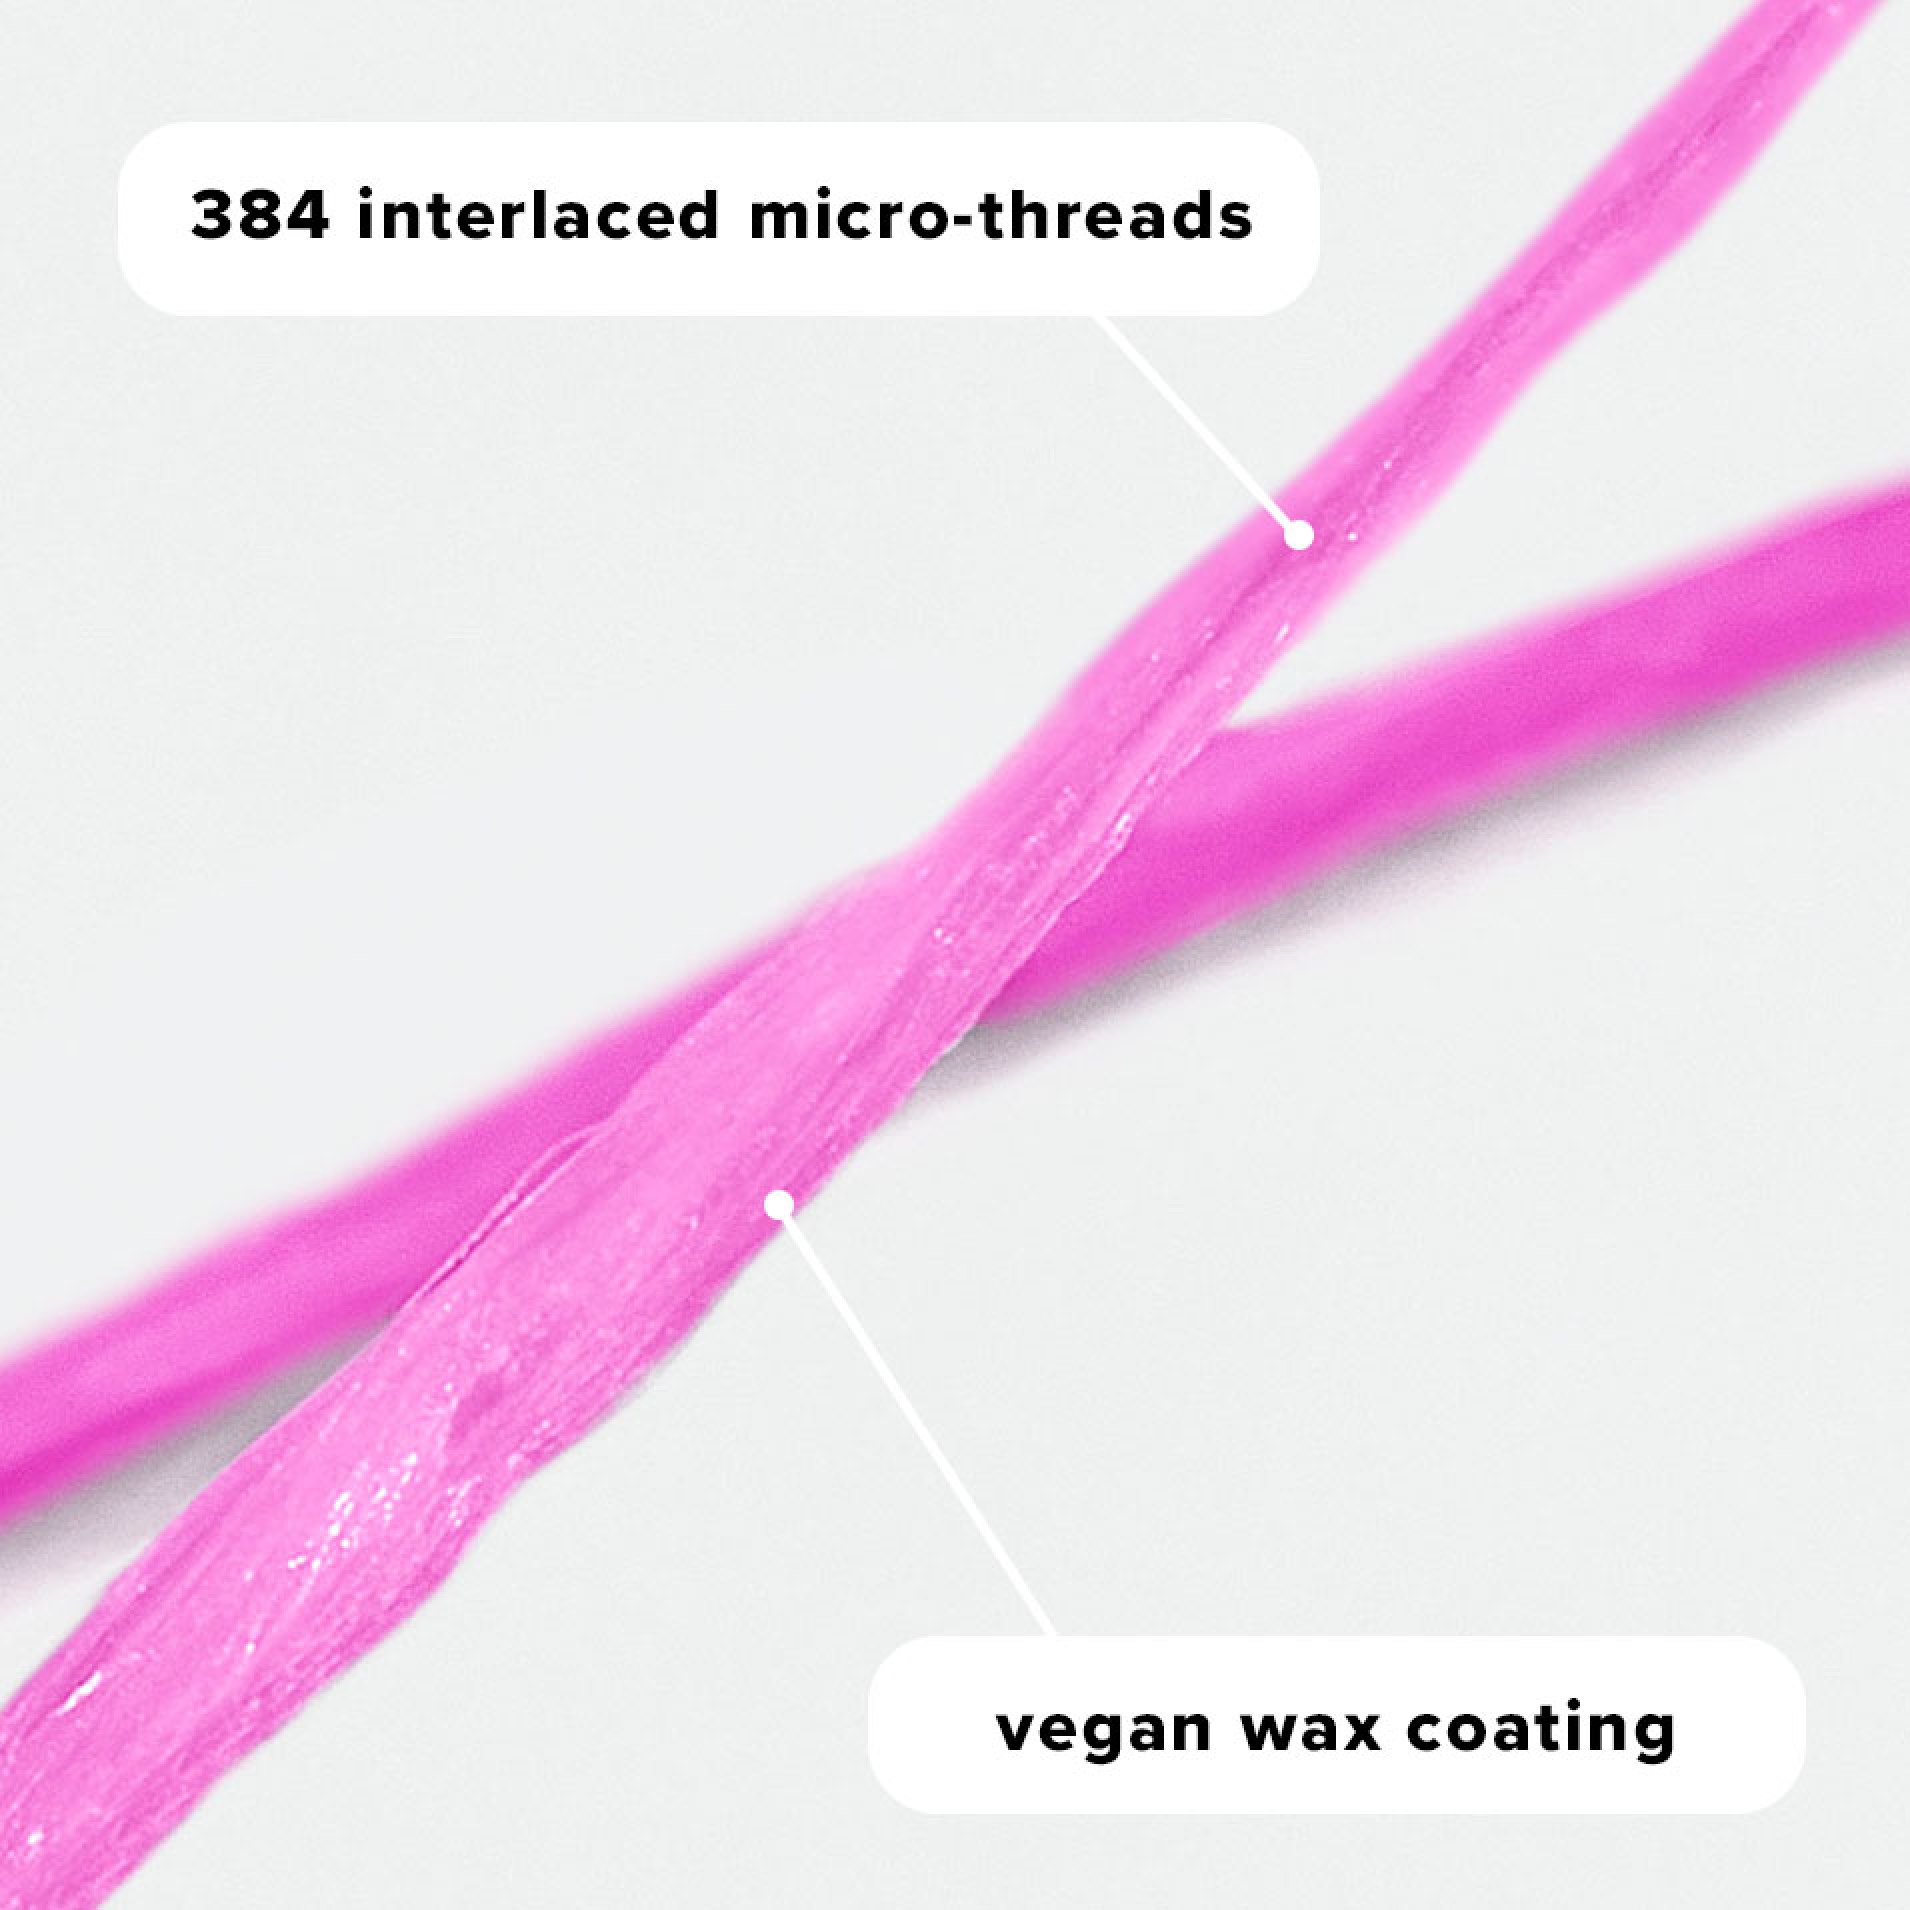 A pink string of the Reach POP Cinnamon Dental Floss on a light grey surface zoomed in to show the micro-threads, and black text over it "384 interlaced micro-threads" and "vegan wax coating"